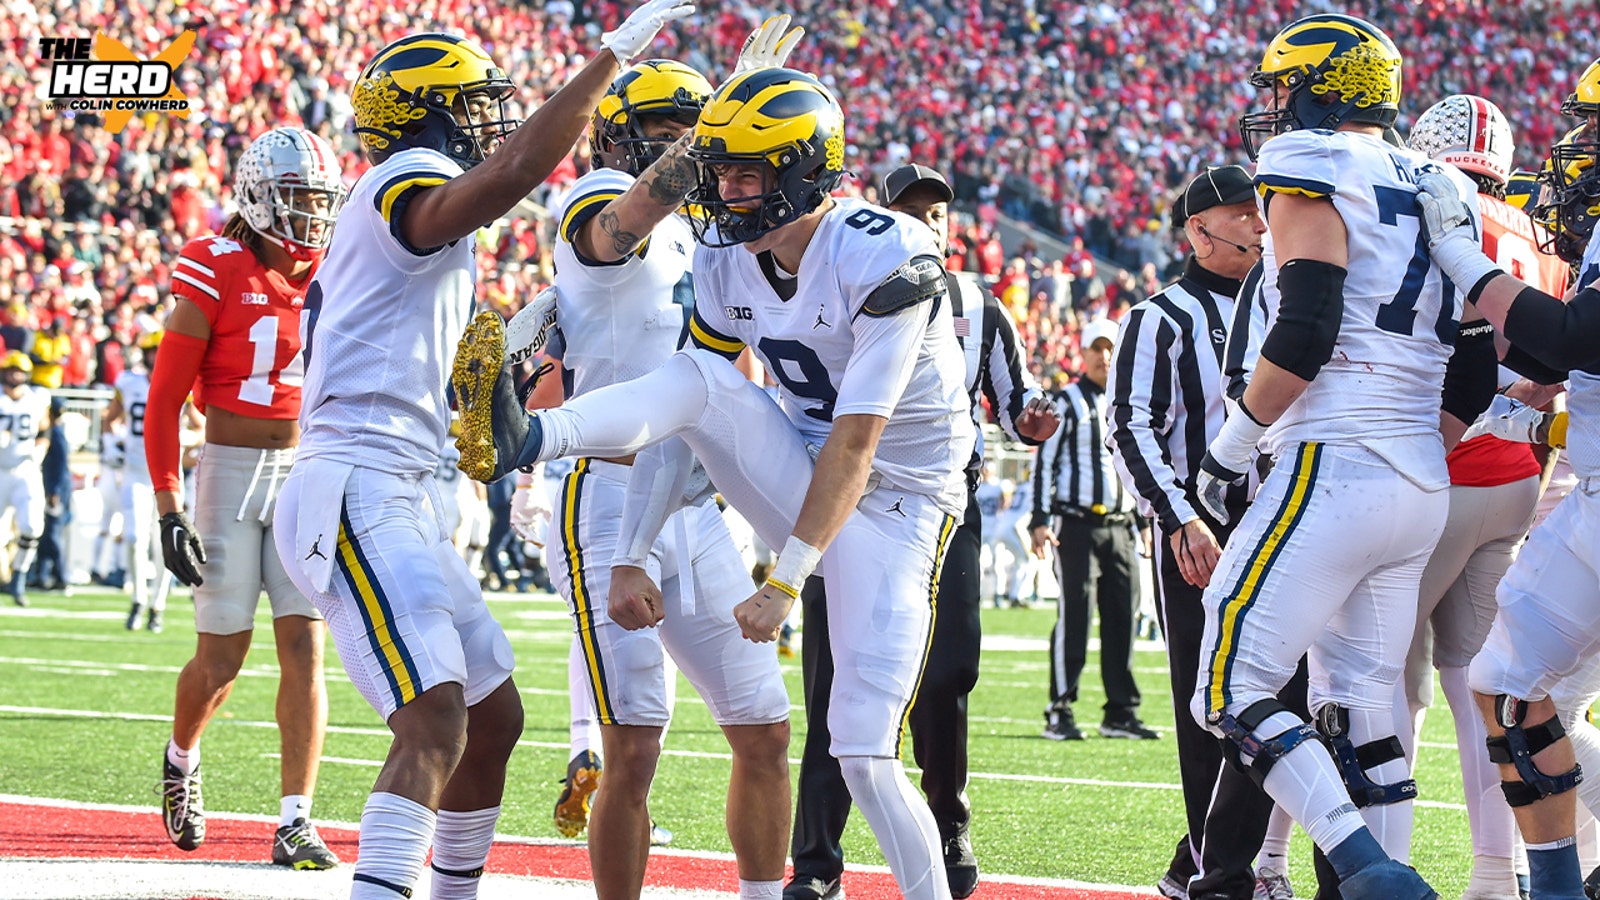 Has Michigan officially passed Ohio State's football program?